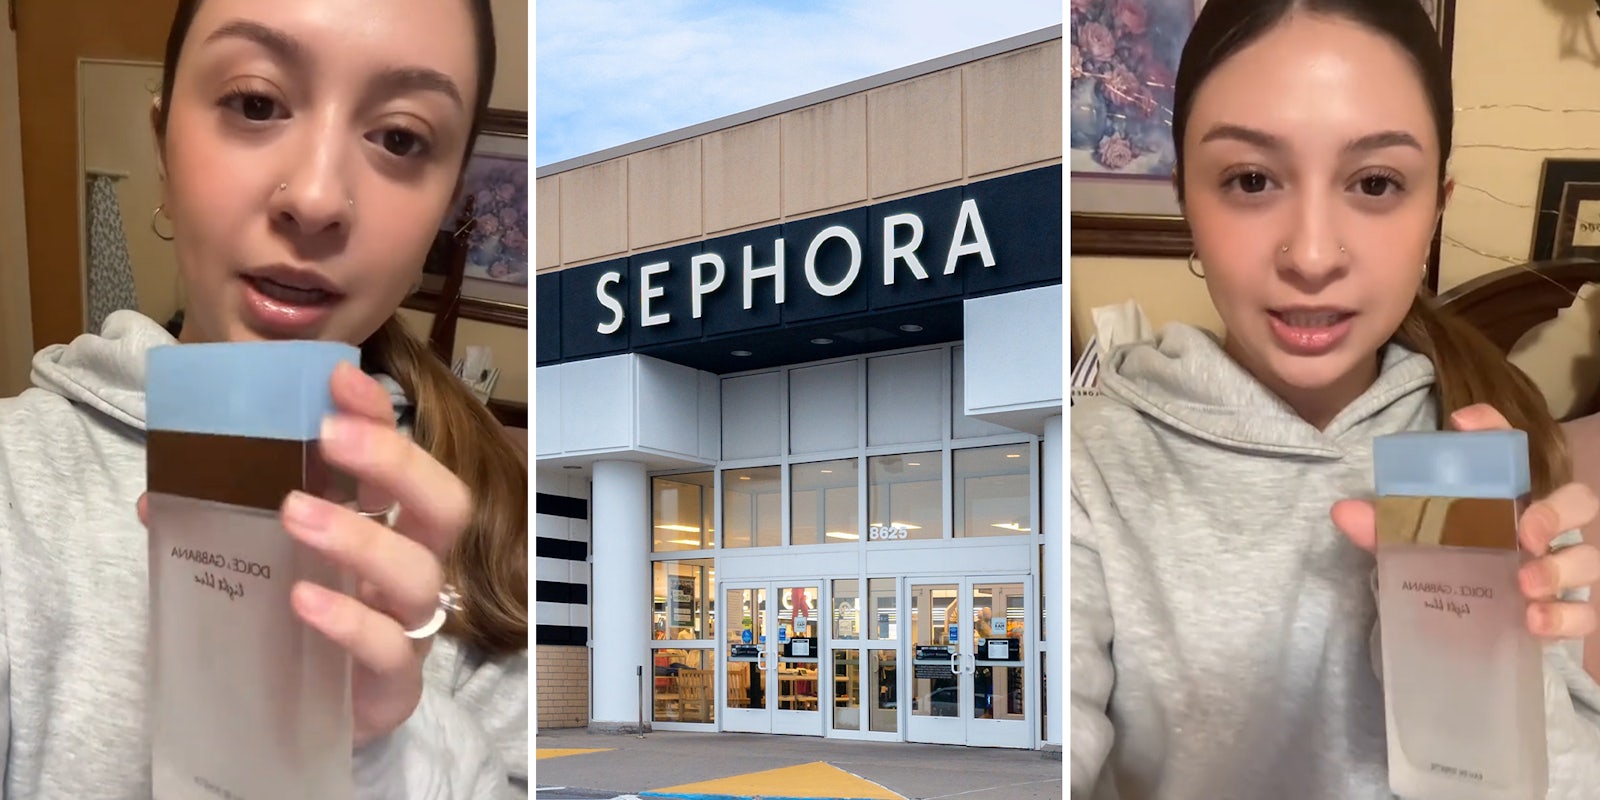 Woman says she bought $100 perfume from Sephora as a gift. The bottle came empty and store won’t take it back